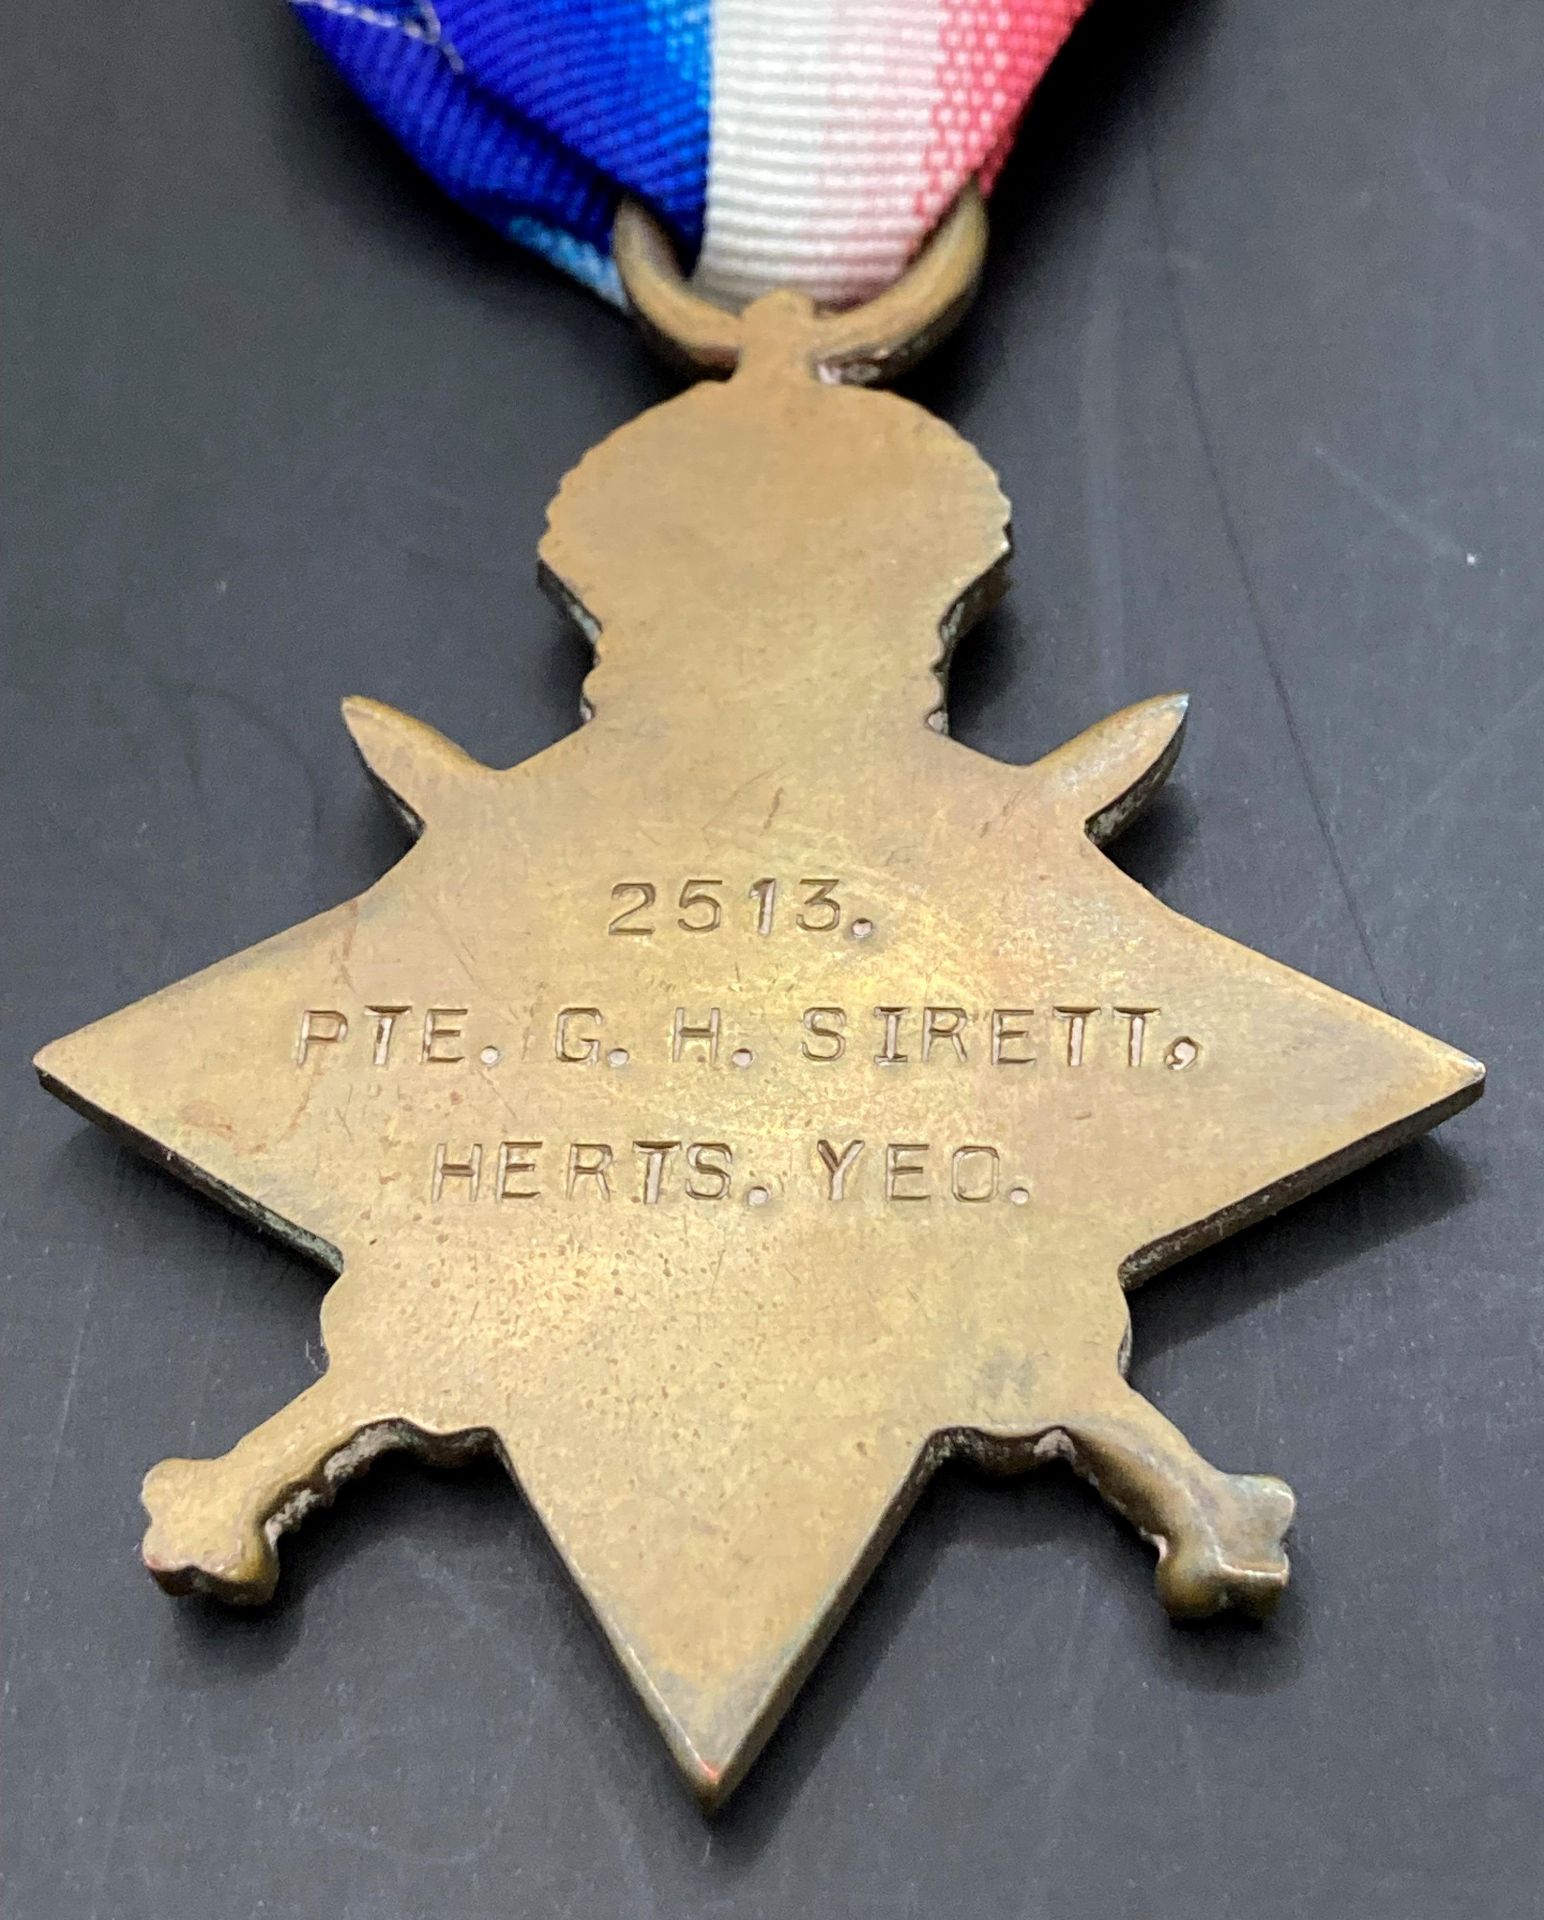 Three First World War medals - 1914-1915 Star, War Medal and Victory Medal to 2513 Pte GH Sirett, - Image 3 of 6